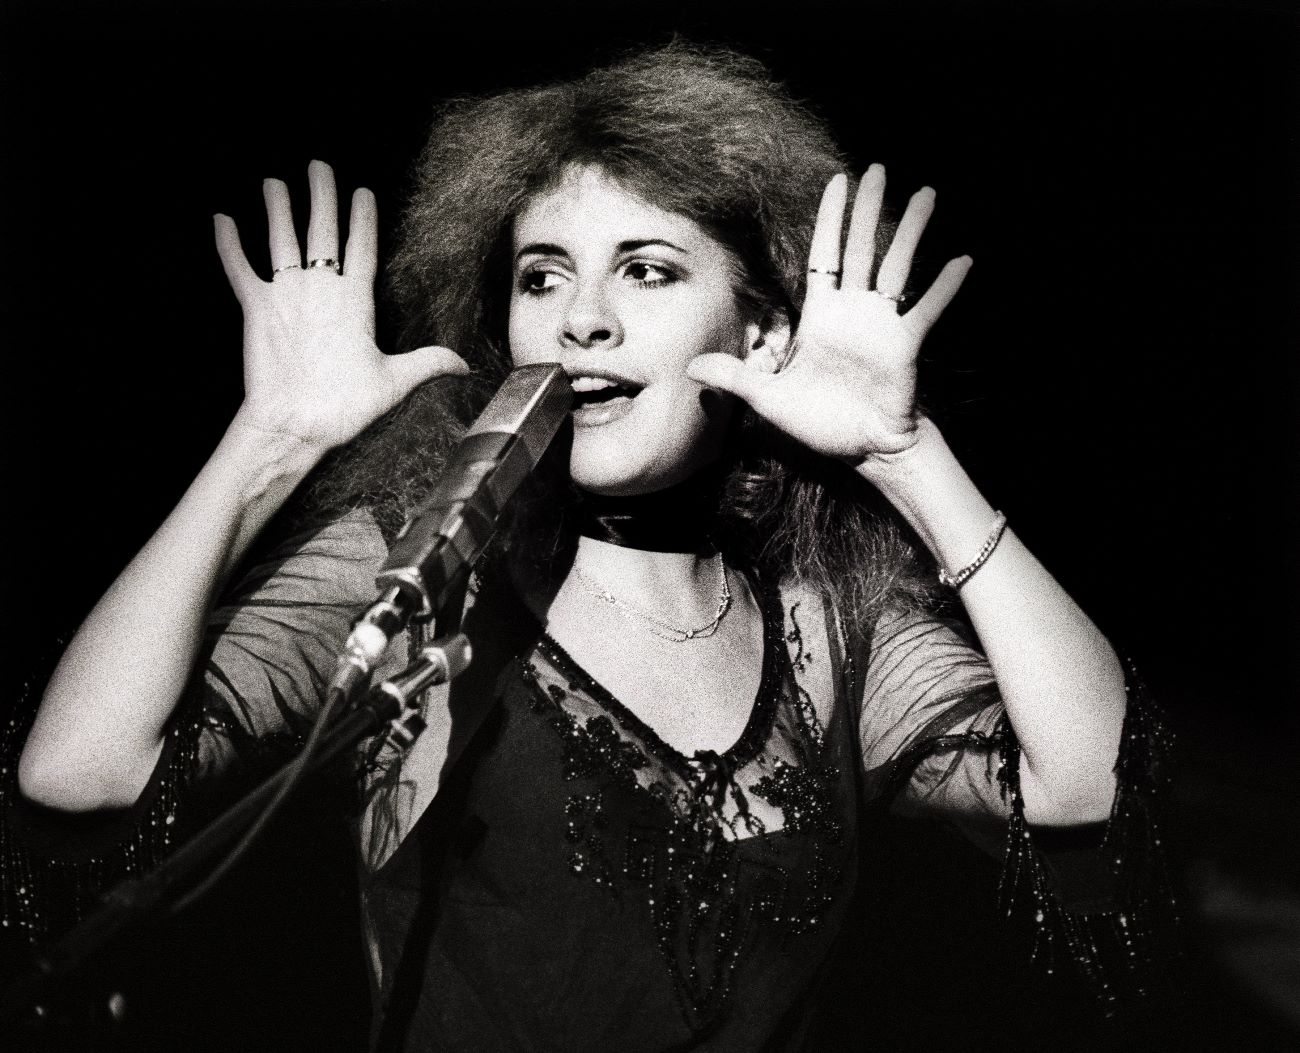 Stevie Nicks holds her hands up near her face and sings into a microphone.